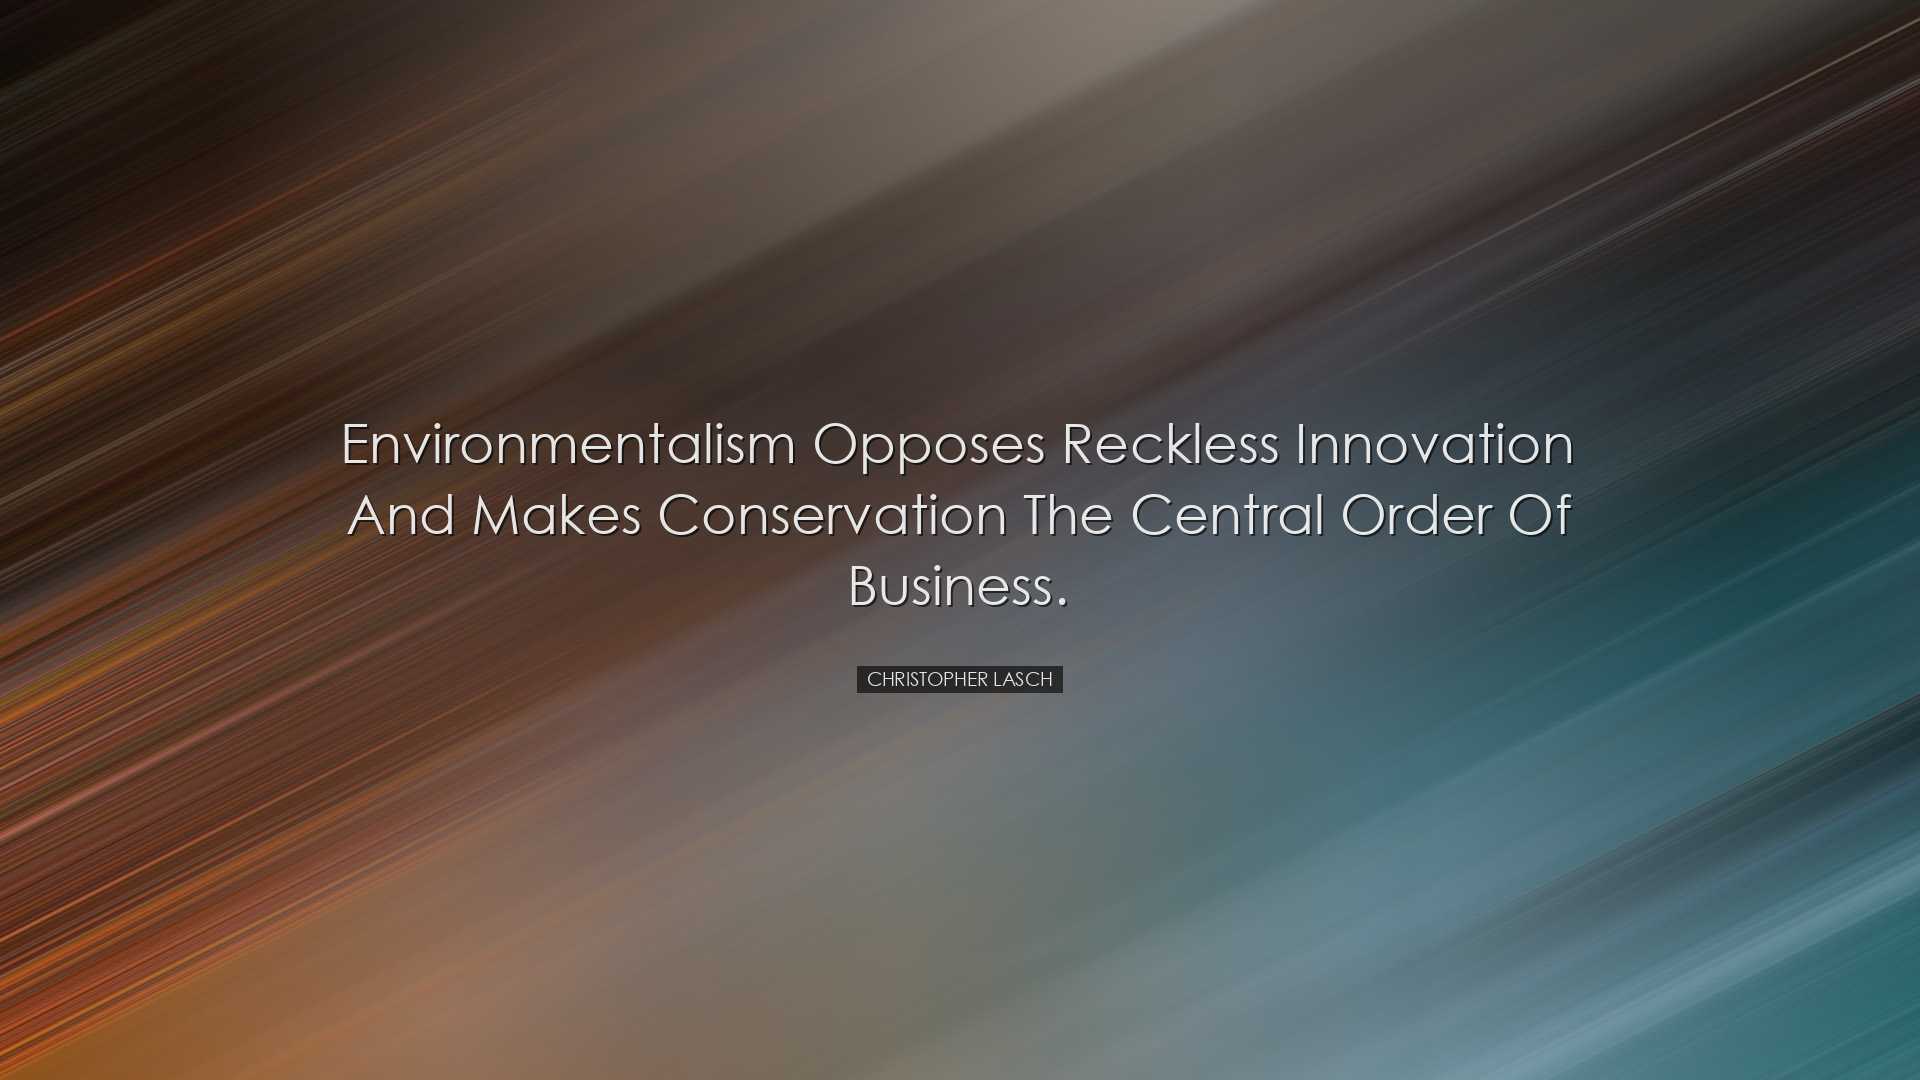 Environmentalism opposes reckless innovation and makes conservatio